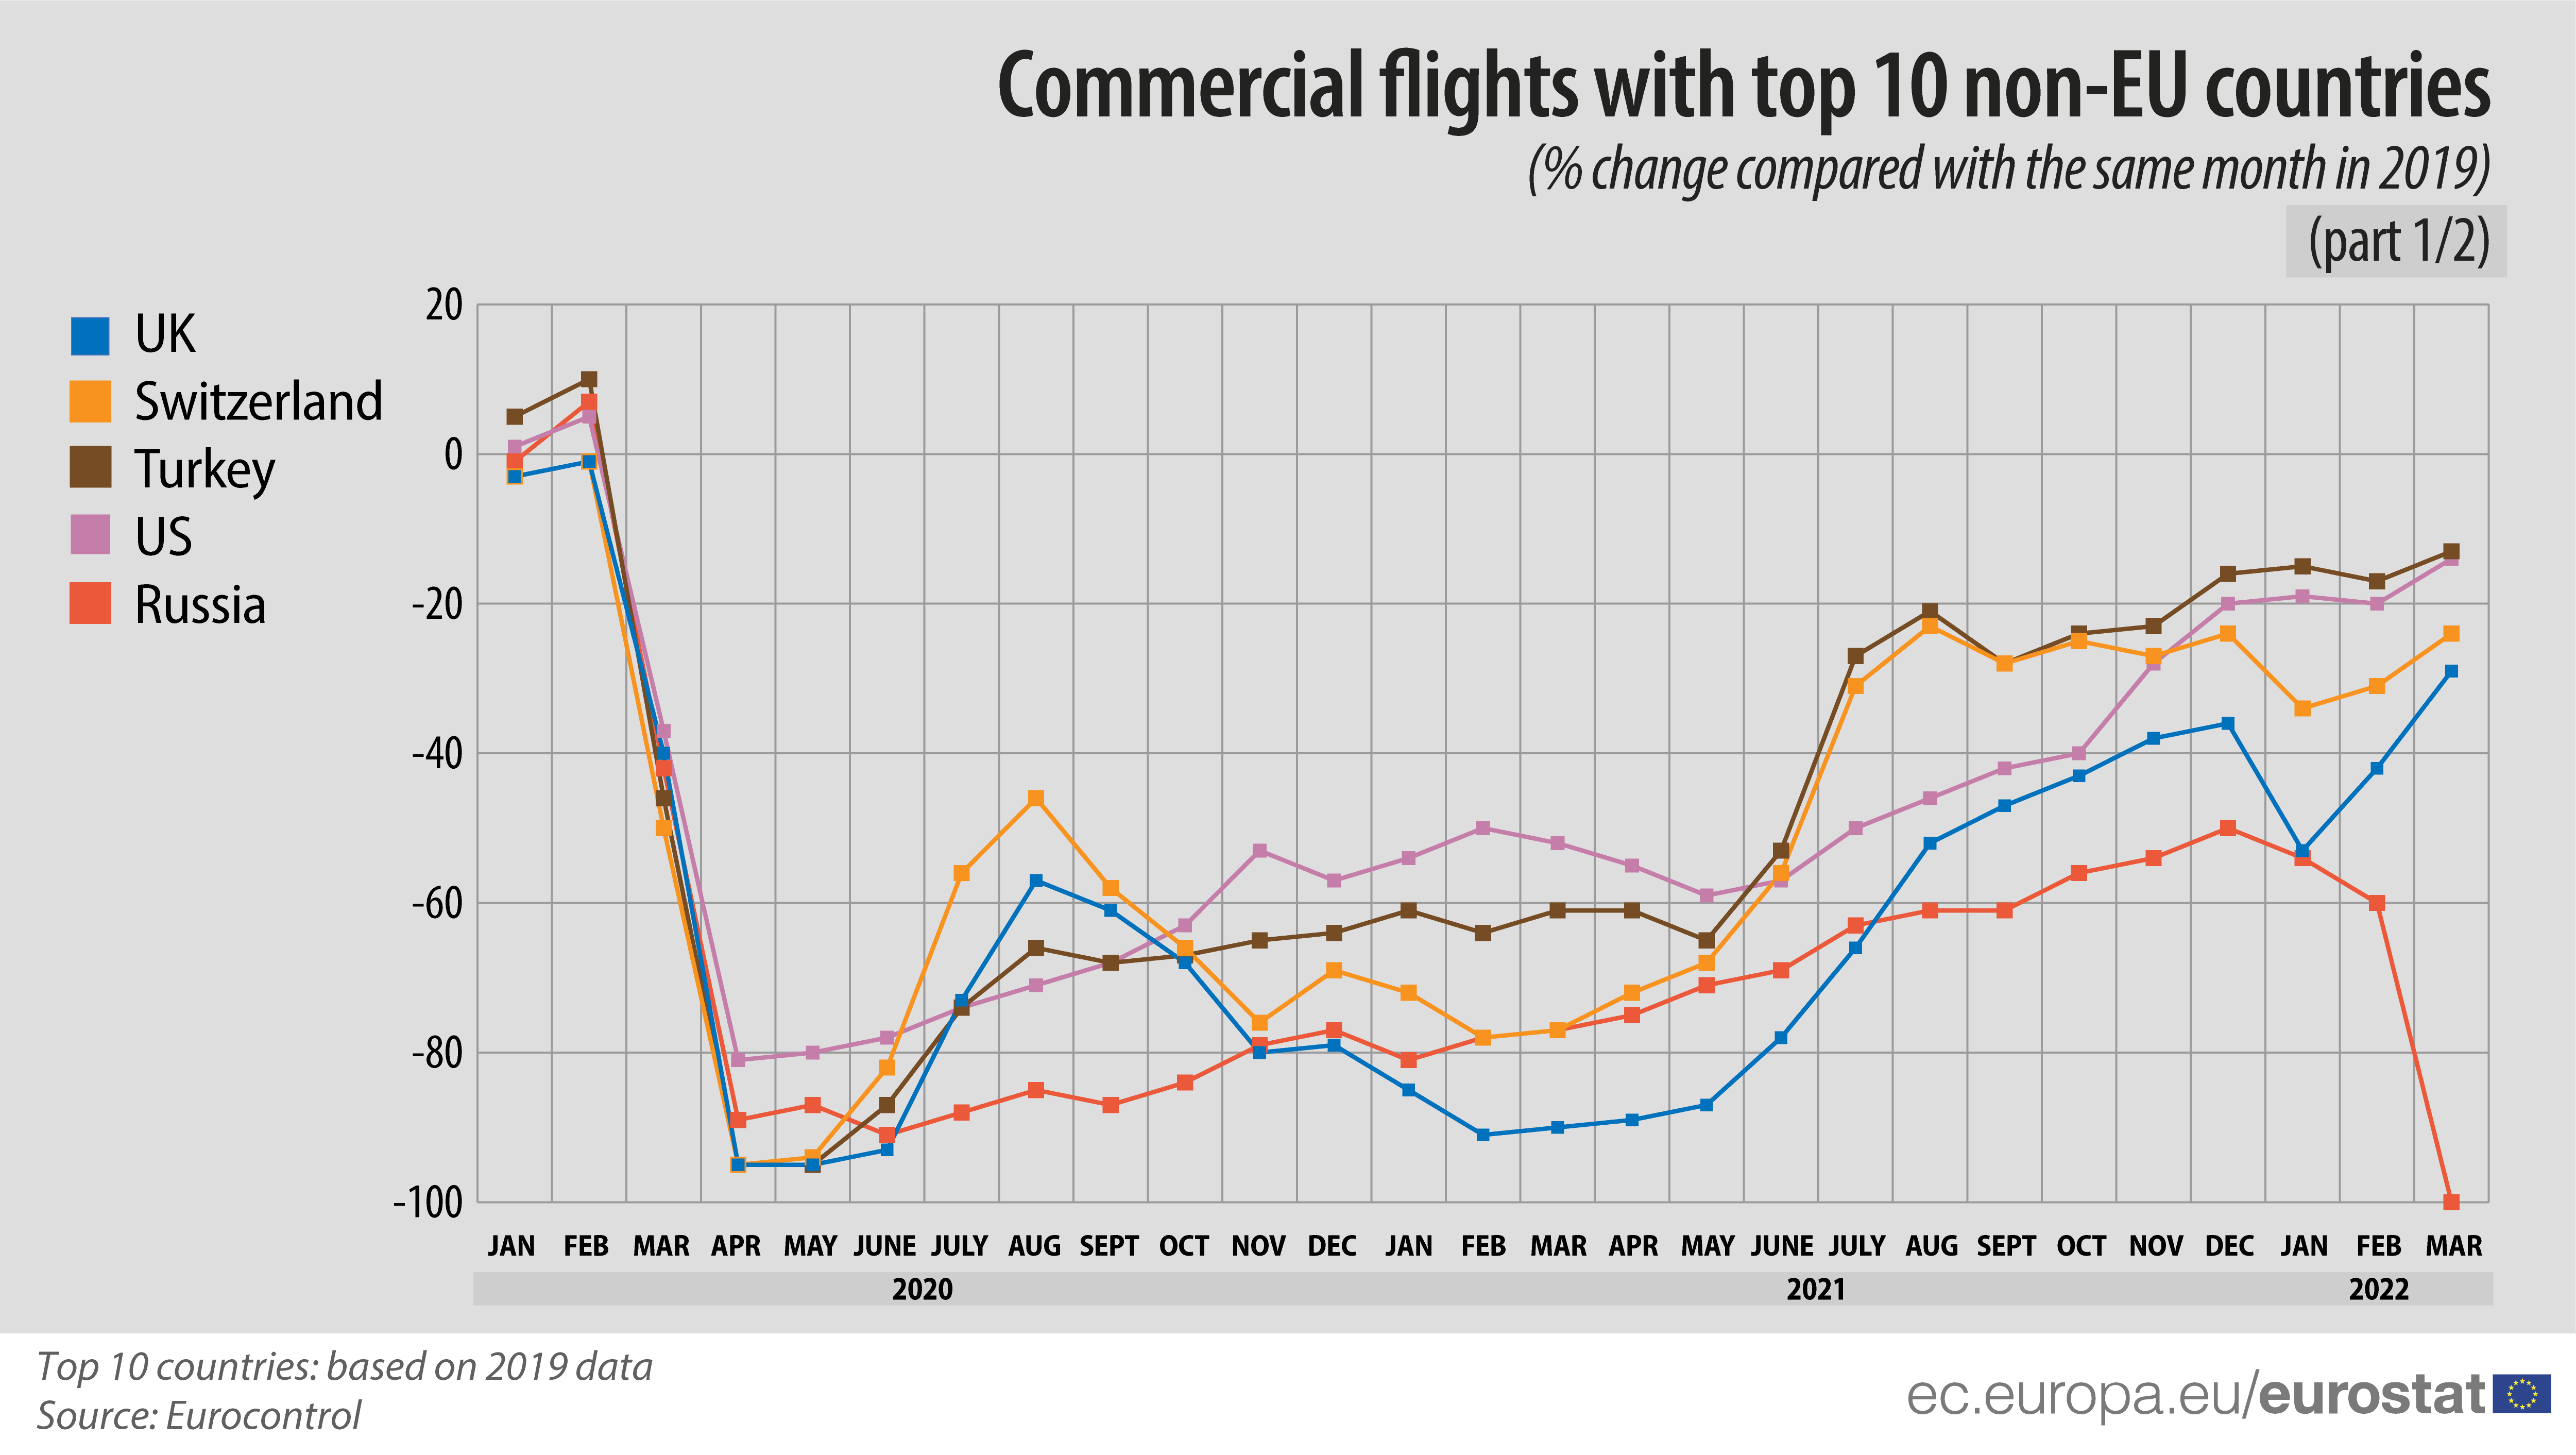 Timeline: Commercial flights with top 10 non-EU countries (% change compared with the same month in 2019; part 1/2)